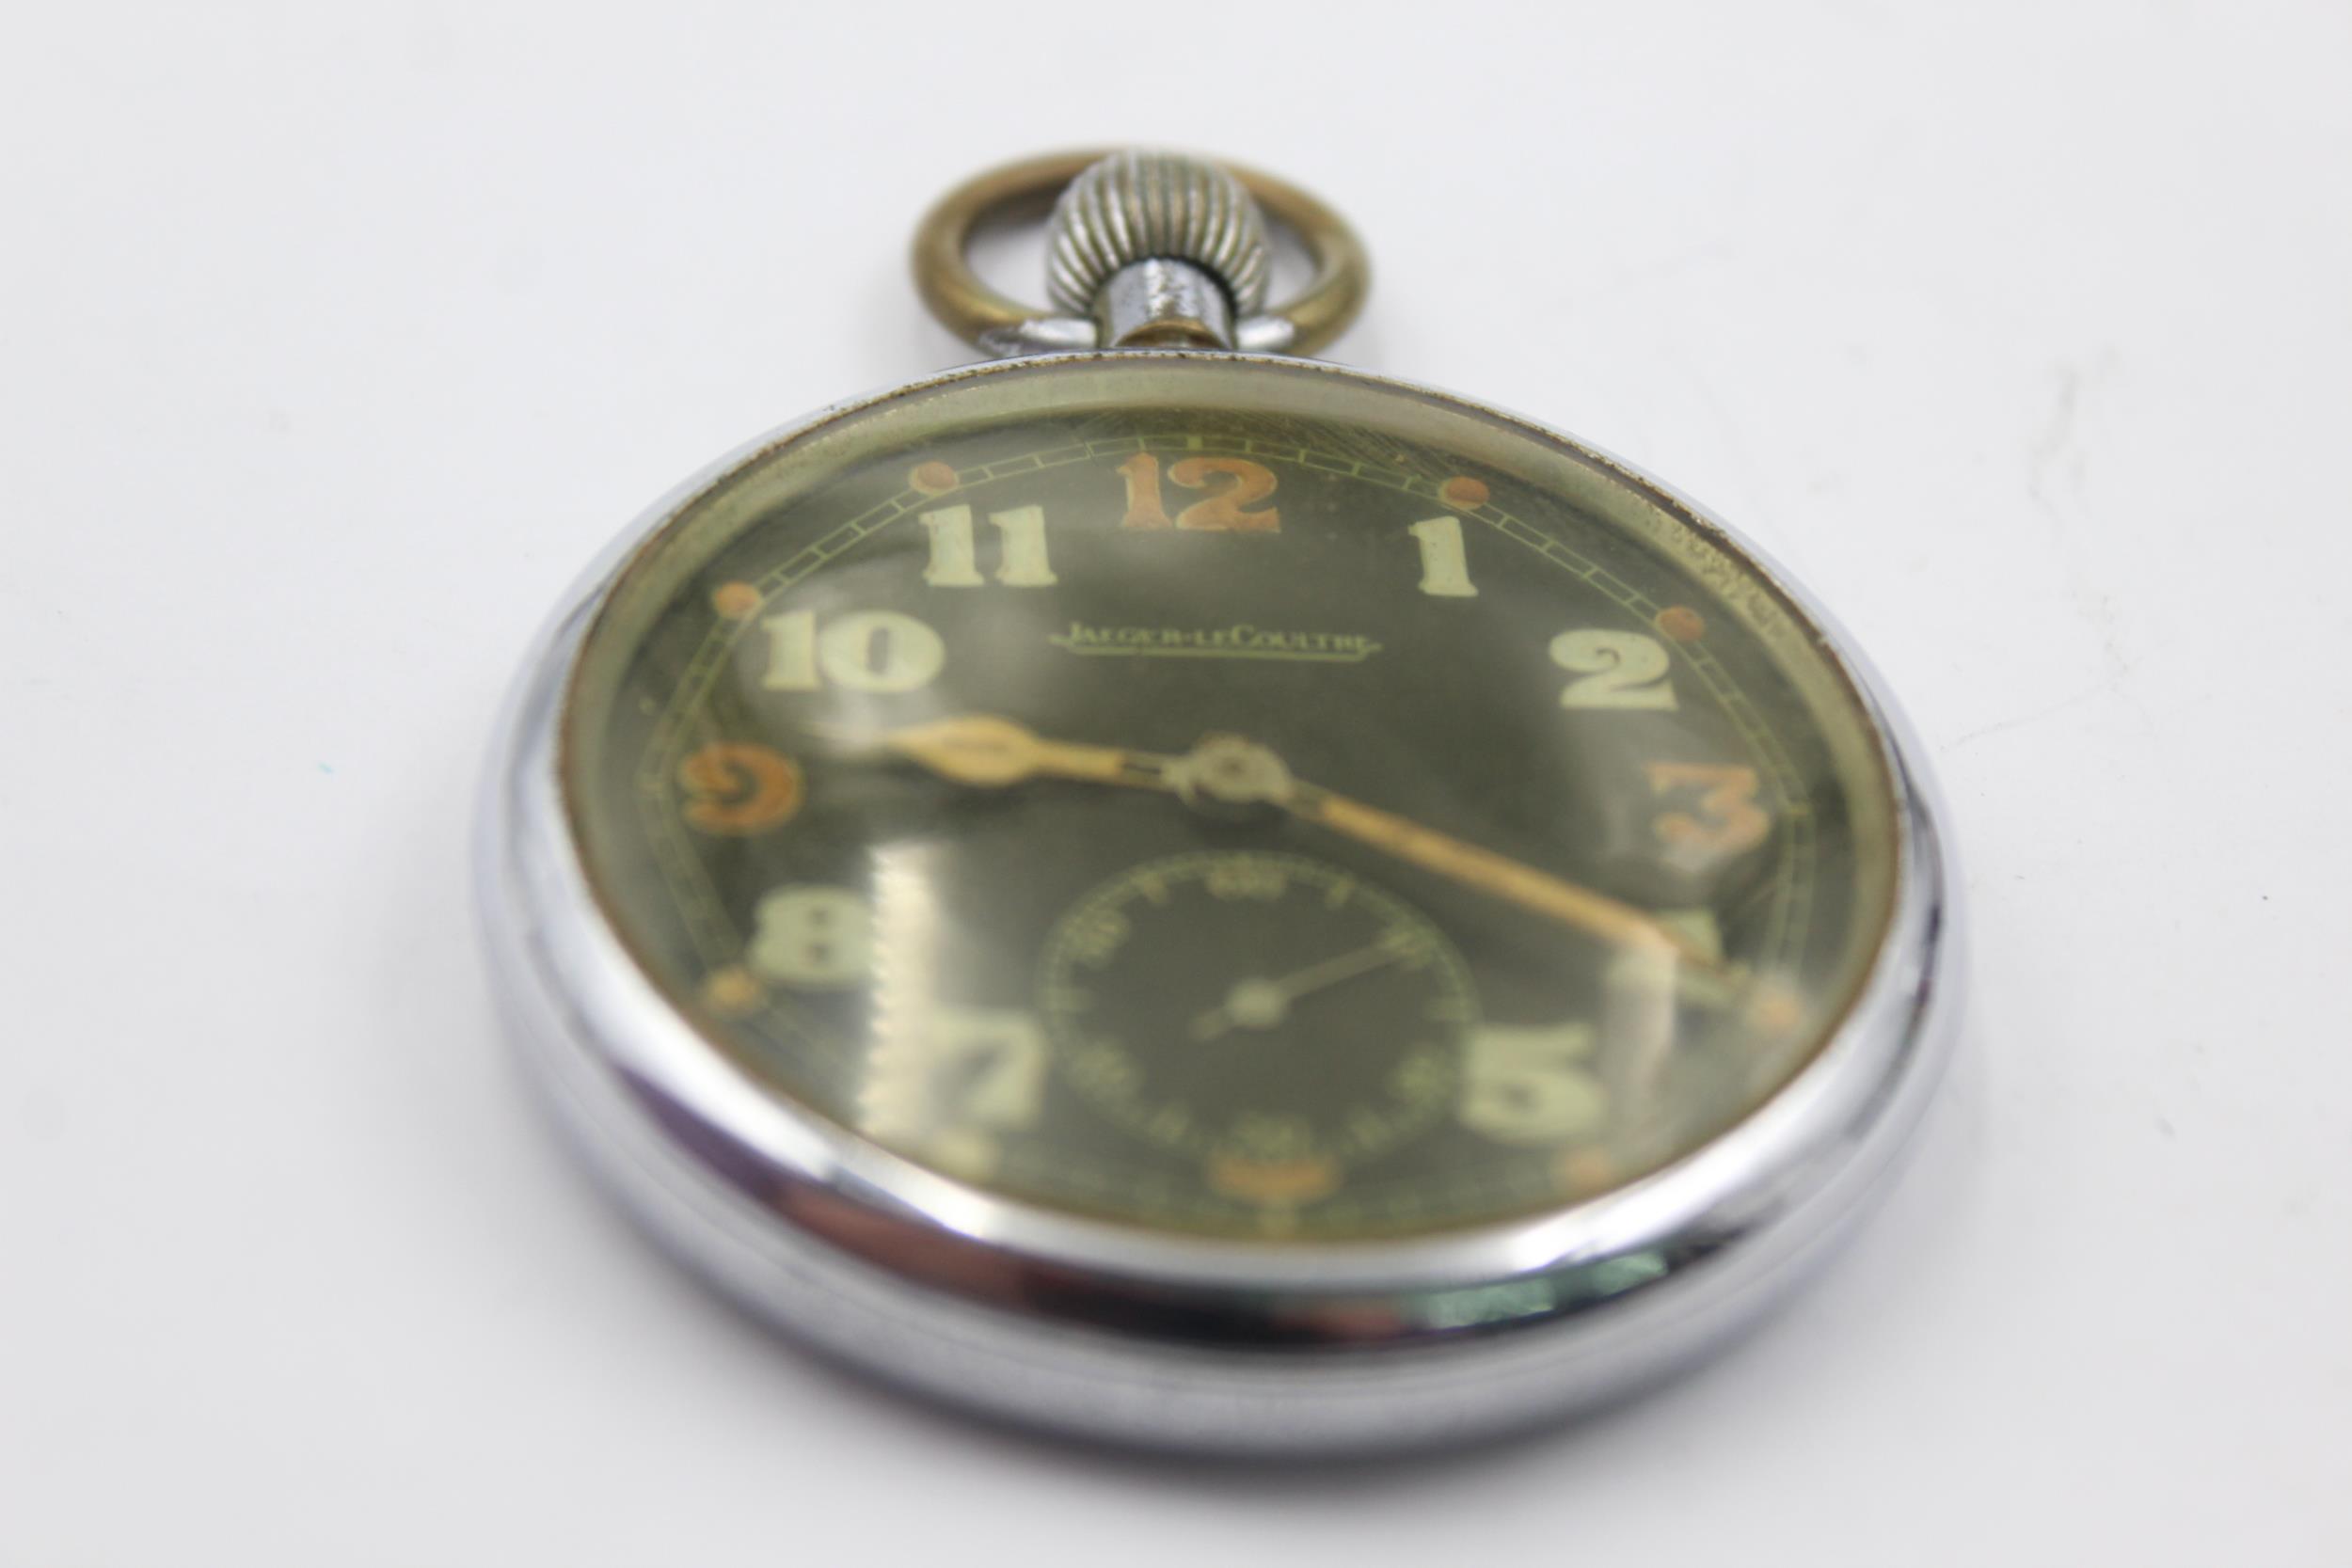 Vintage Gents JAEGER-LECOULTRE WWII G.S.T.P POCKET WATCH Hand-Wind WORKING - Image 5 of 5